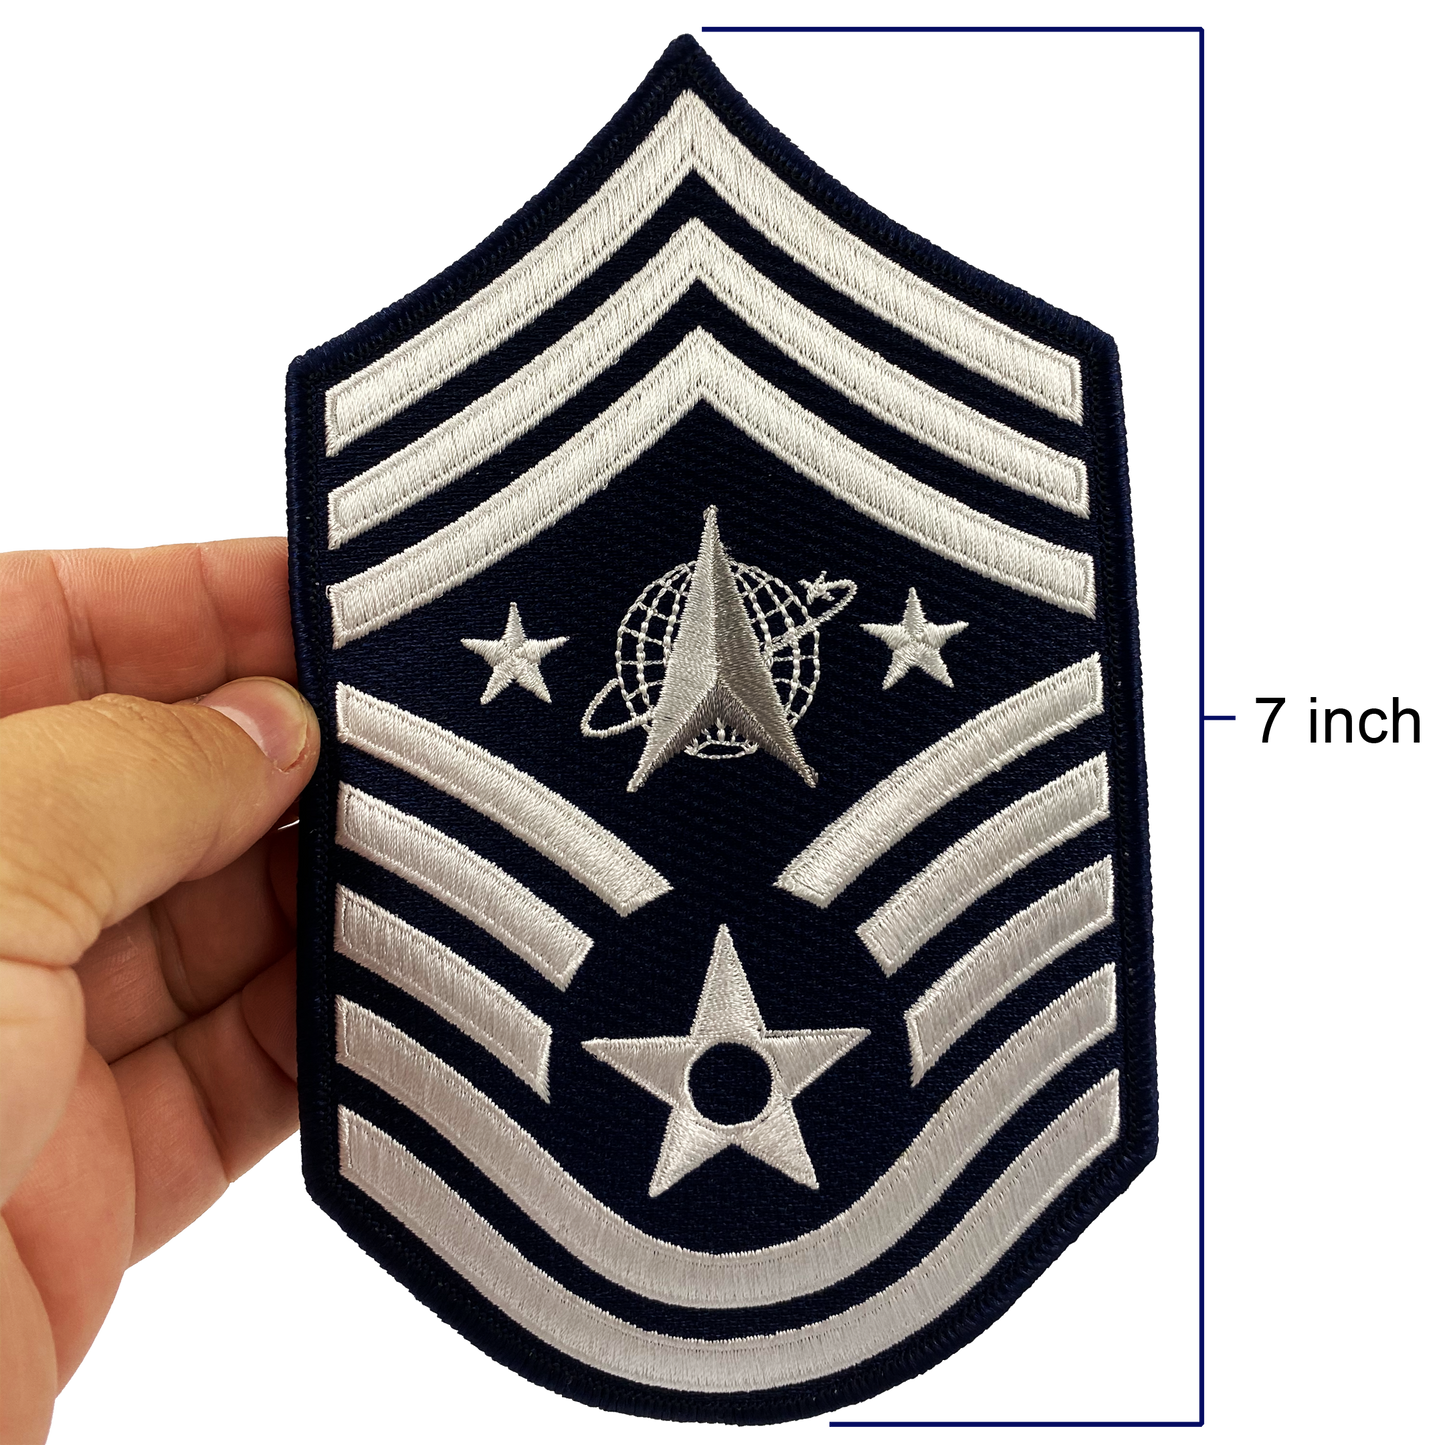 CL4-05 United States Space Force Patch U.S. Department of the Air Force Senior Enlisted Advisor Chief Master Sergeant Rank